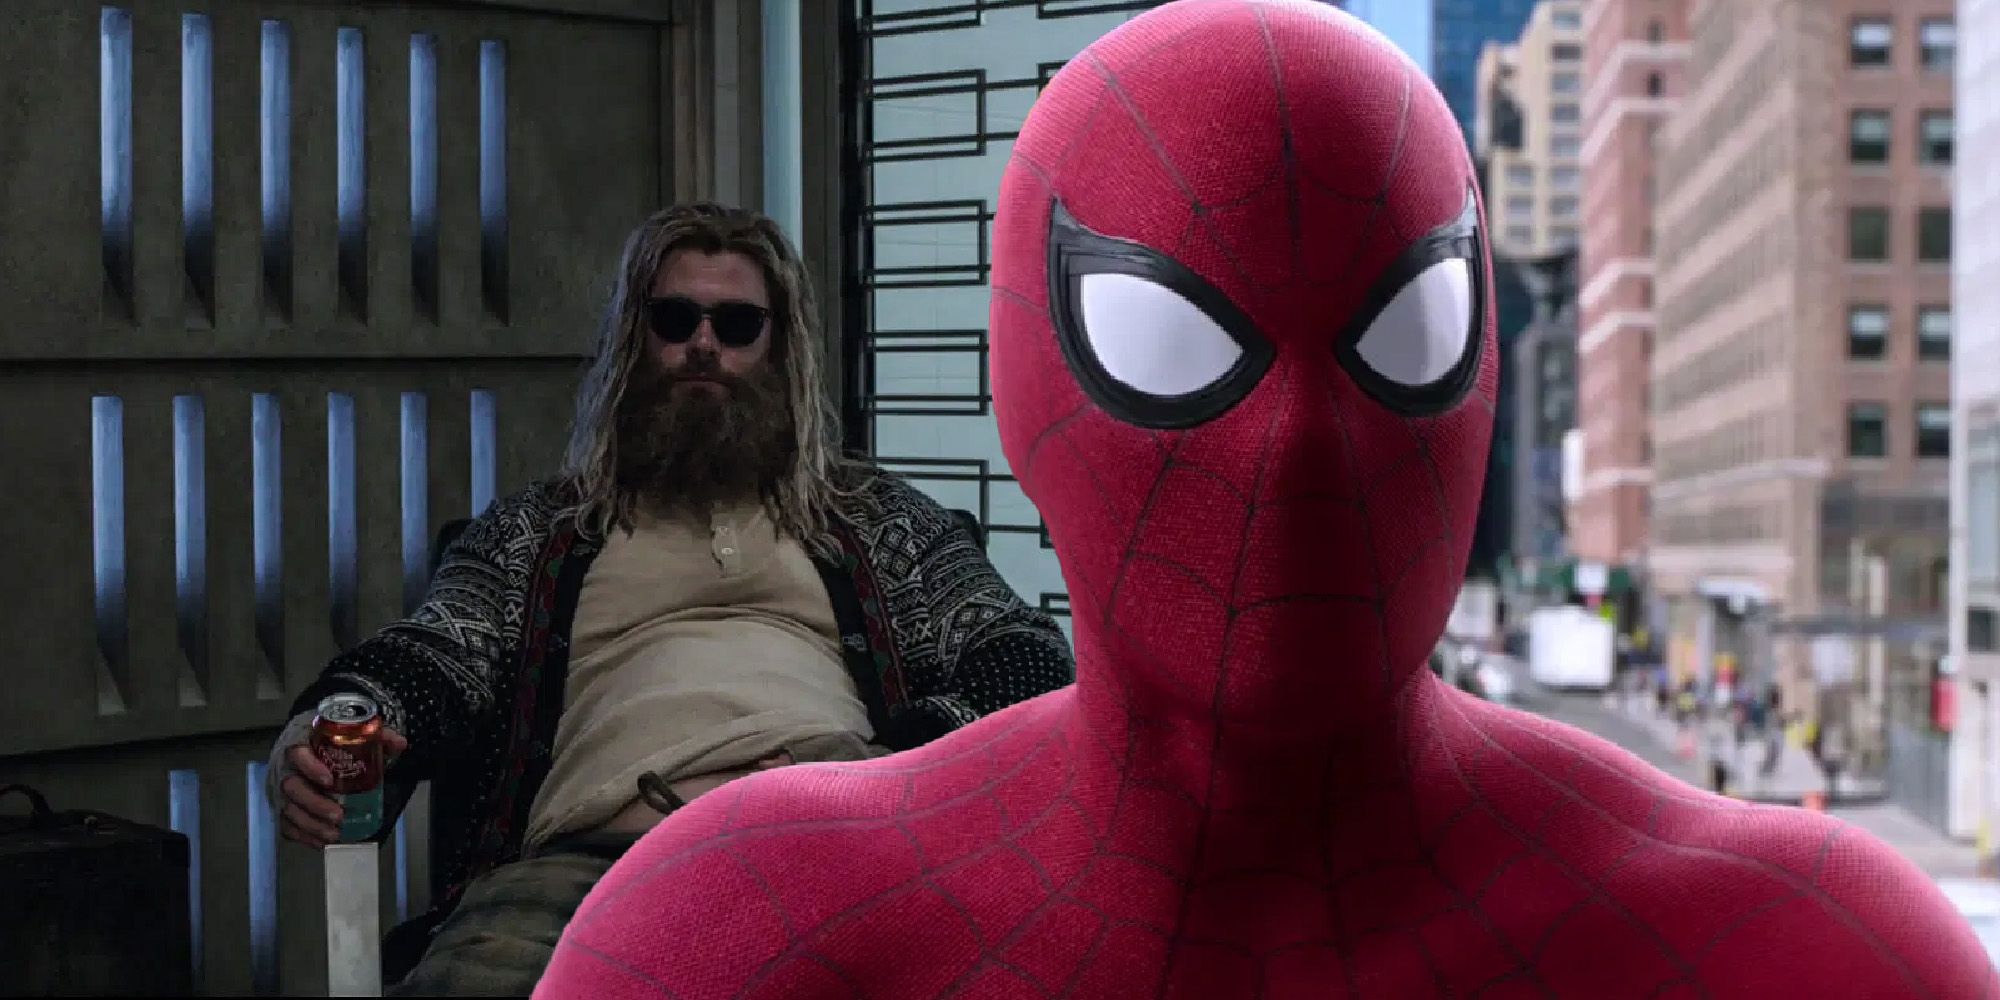 Endgame's Fat Thor Accomplished Spider-Man's Purpose Better Than Him